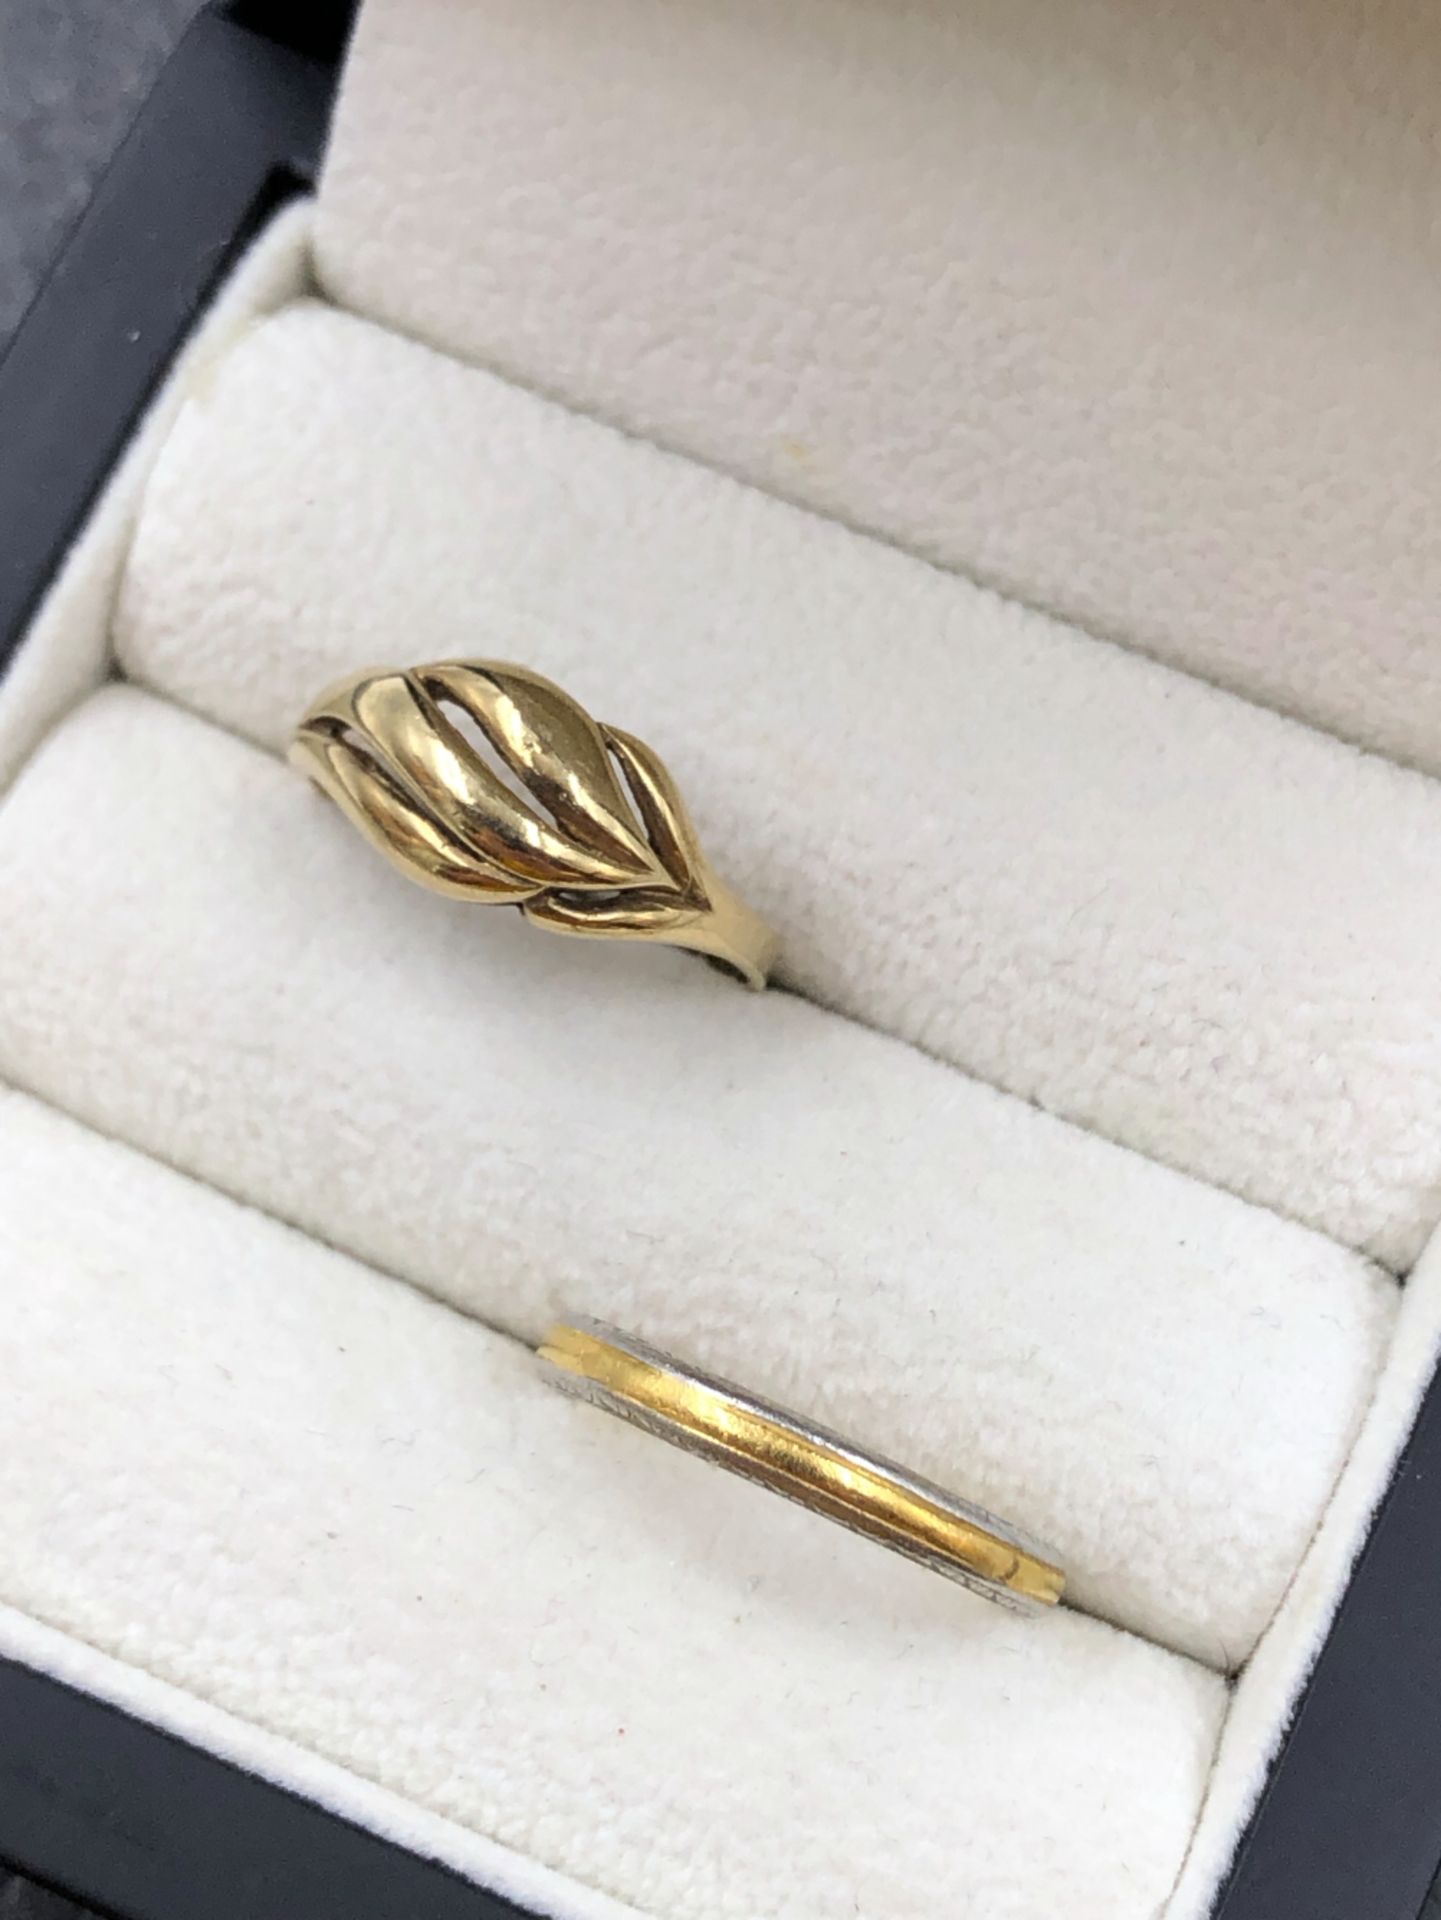 A 9ct HALLMARKED GOLD RING, FINGER SIZE O 1/2, TOGETHER WITH A 22ct AND PLATINUM HALLMARKED